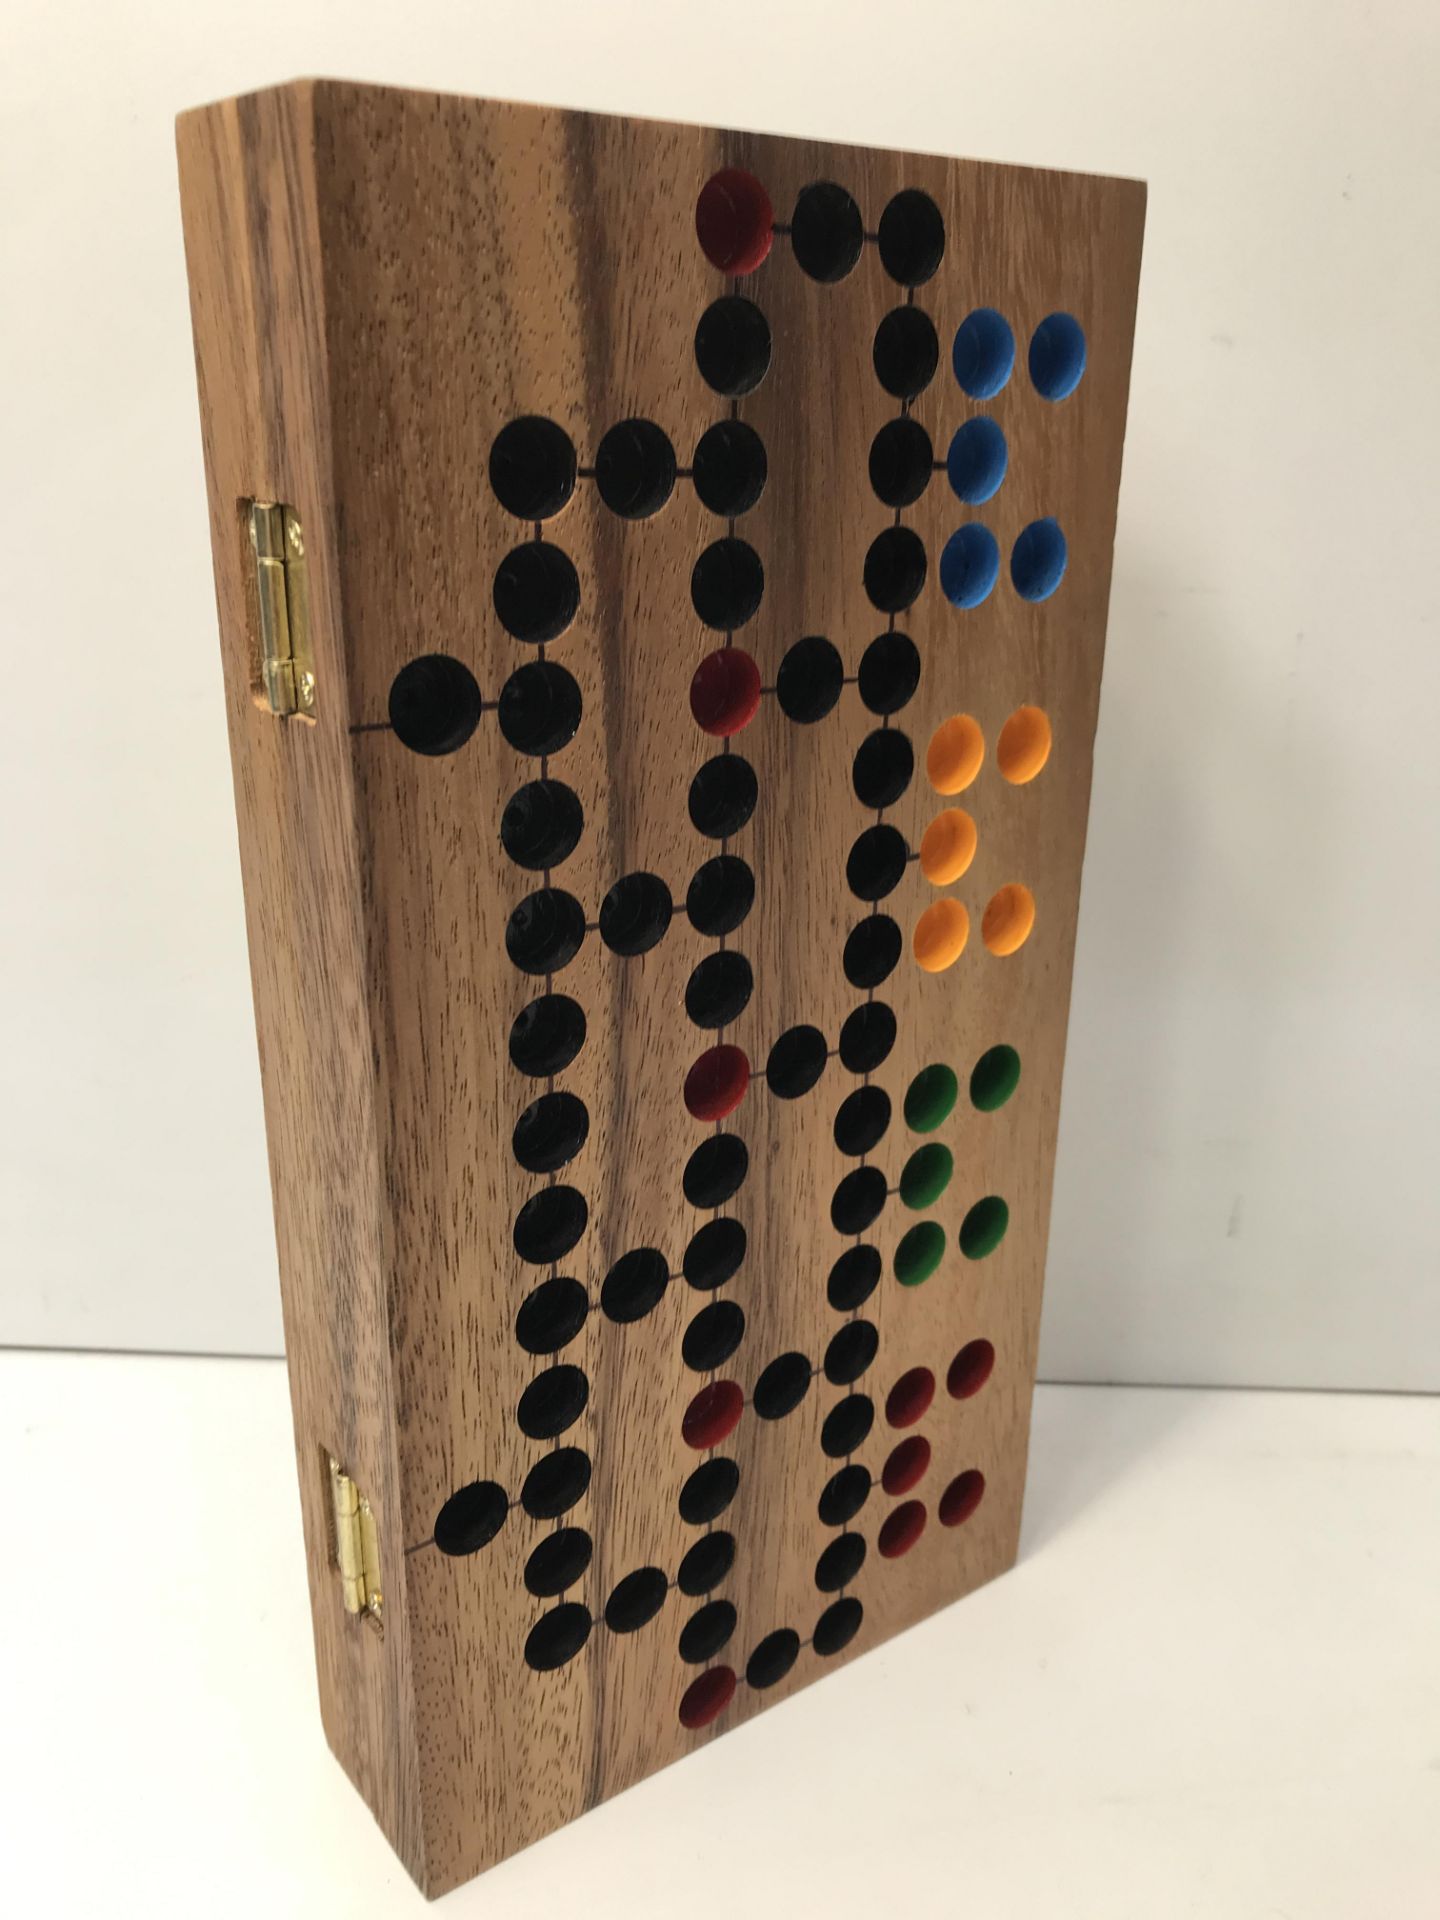 1 x Wooden board game